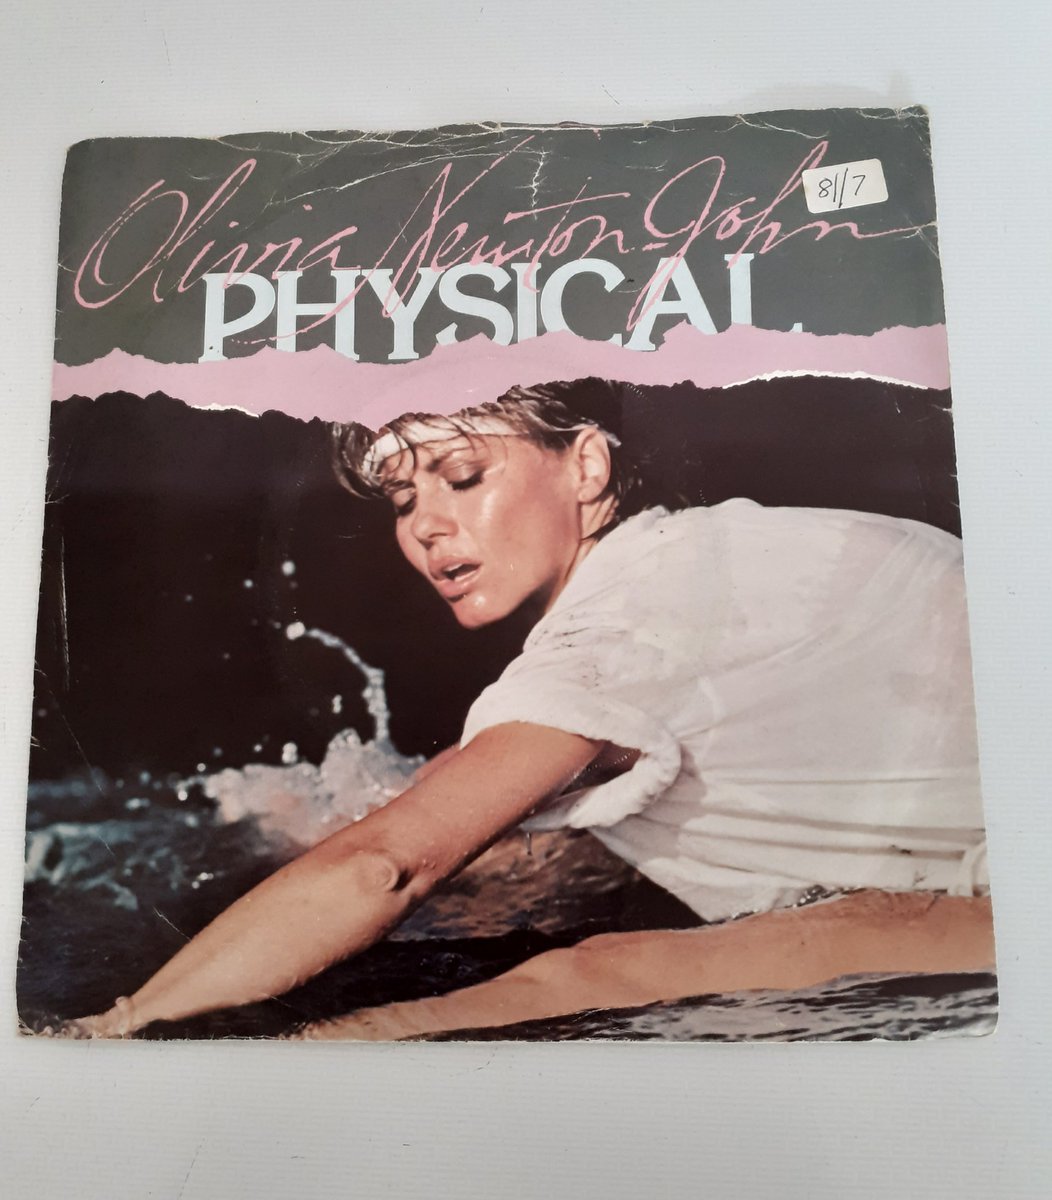 Random Record of the day: Olivia Newton John - Physical https://t.co/rjBTgtE6dH